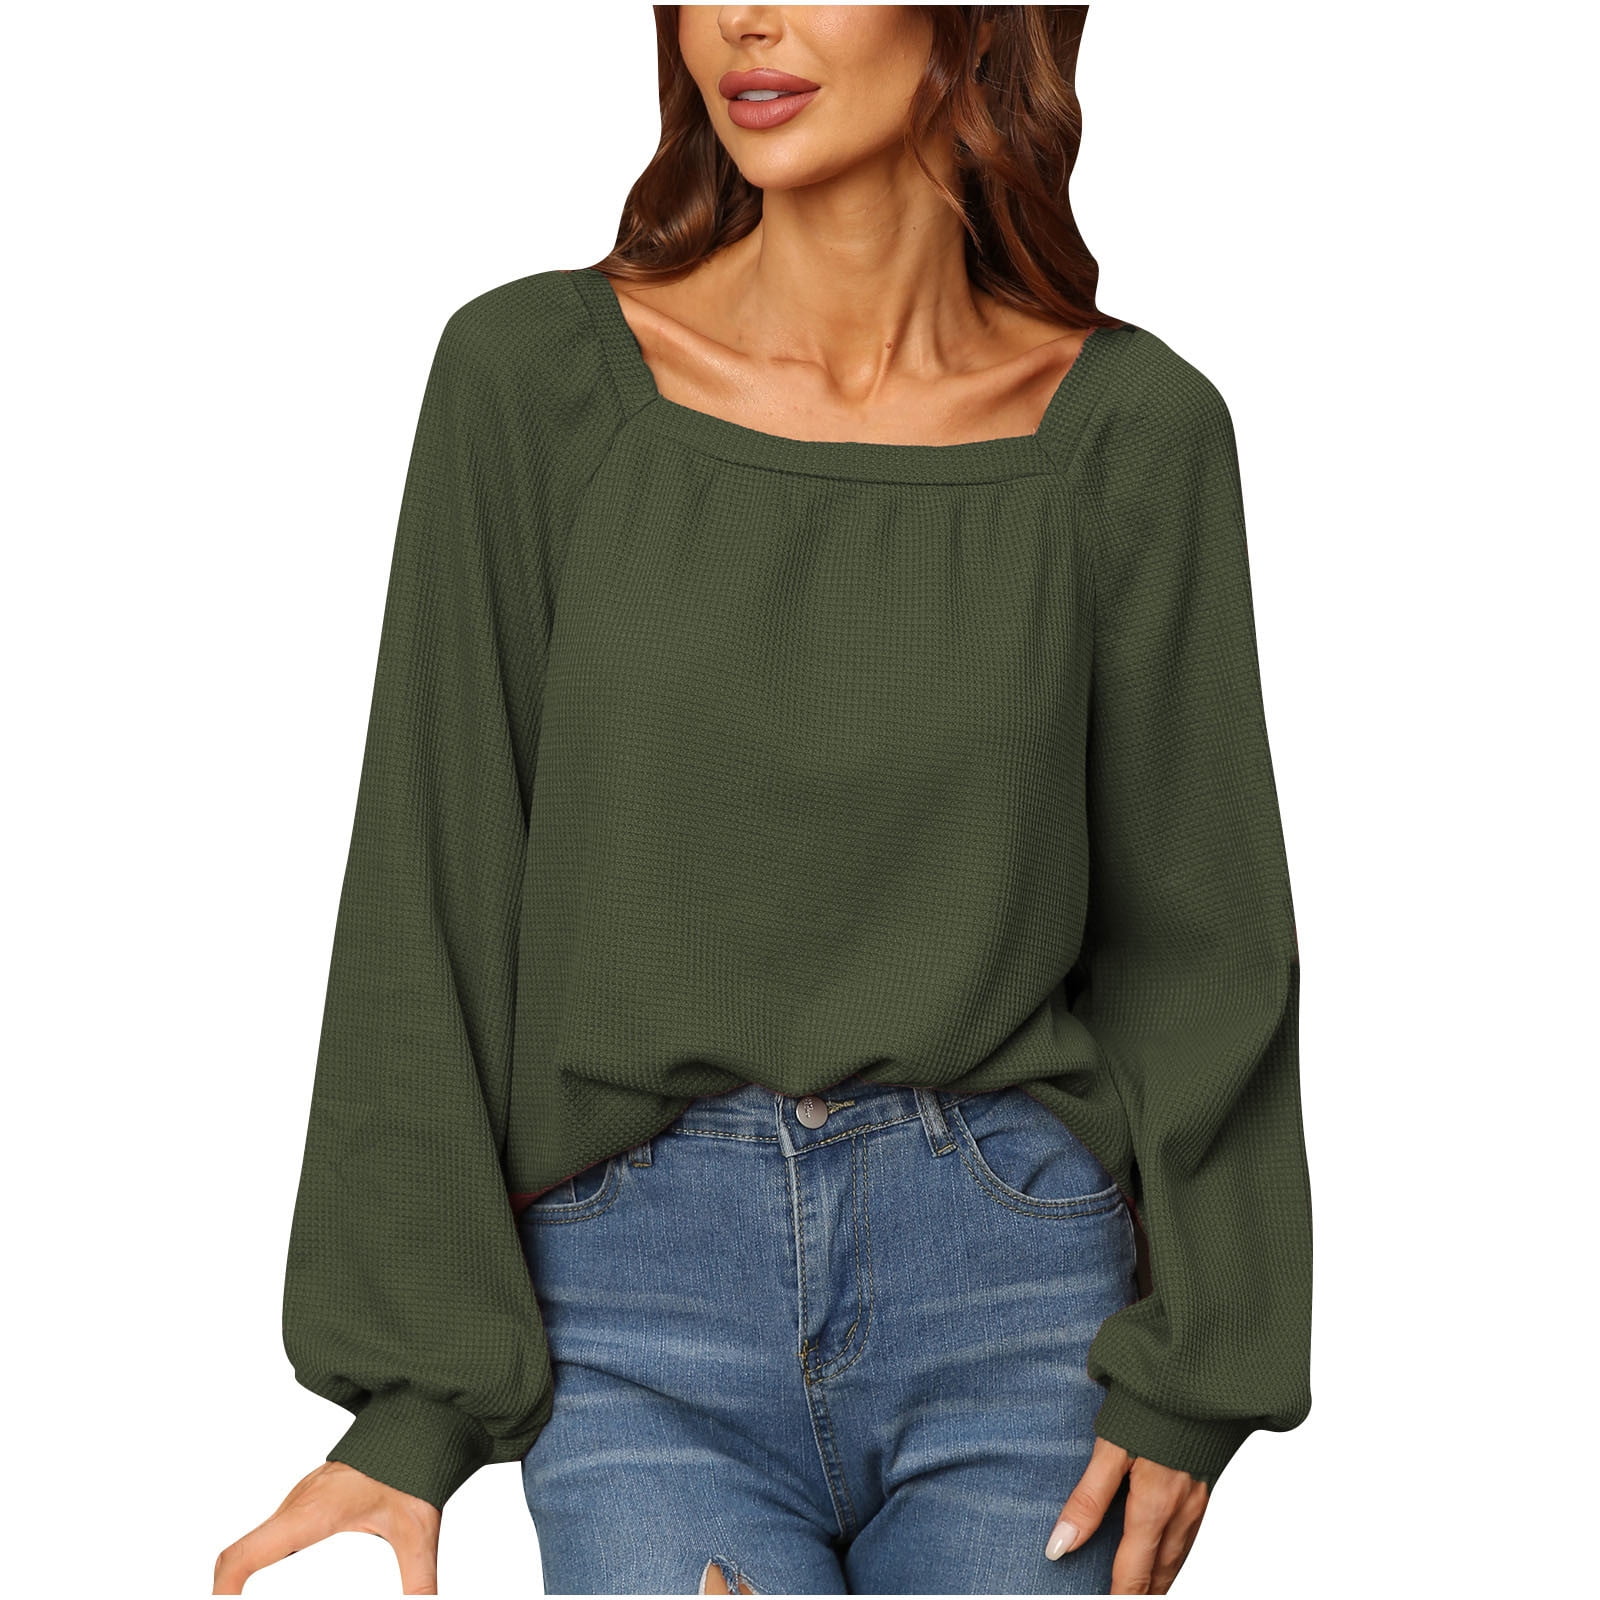 Hfyihgf Womens Square Neck Tops Casual Waffle Knit Lantern Long Sleeve  Shirts Solid Color Pullover Blouse（Green,M)